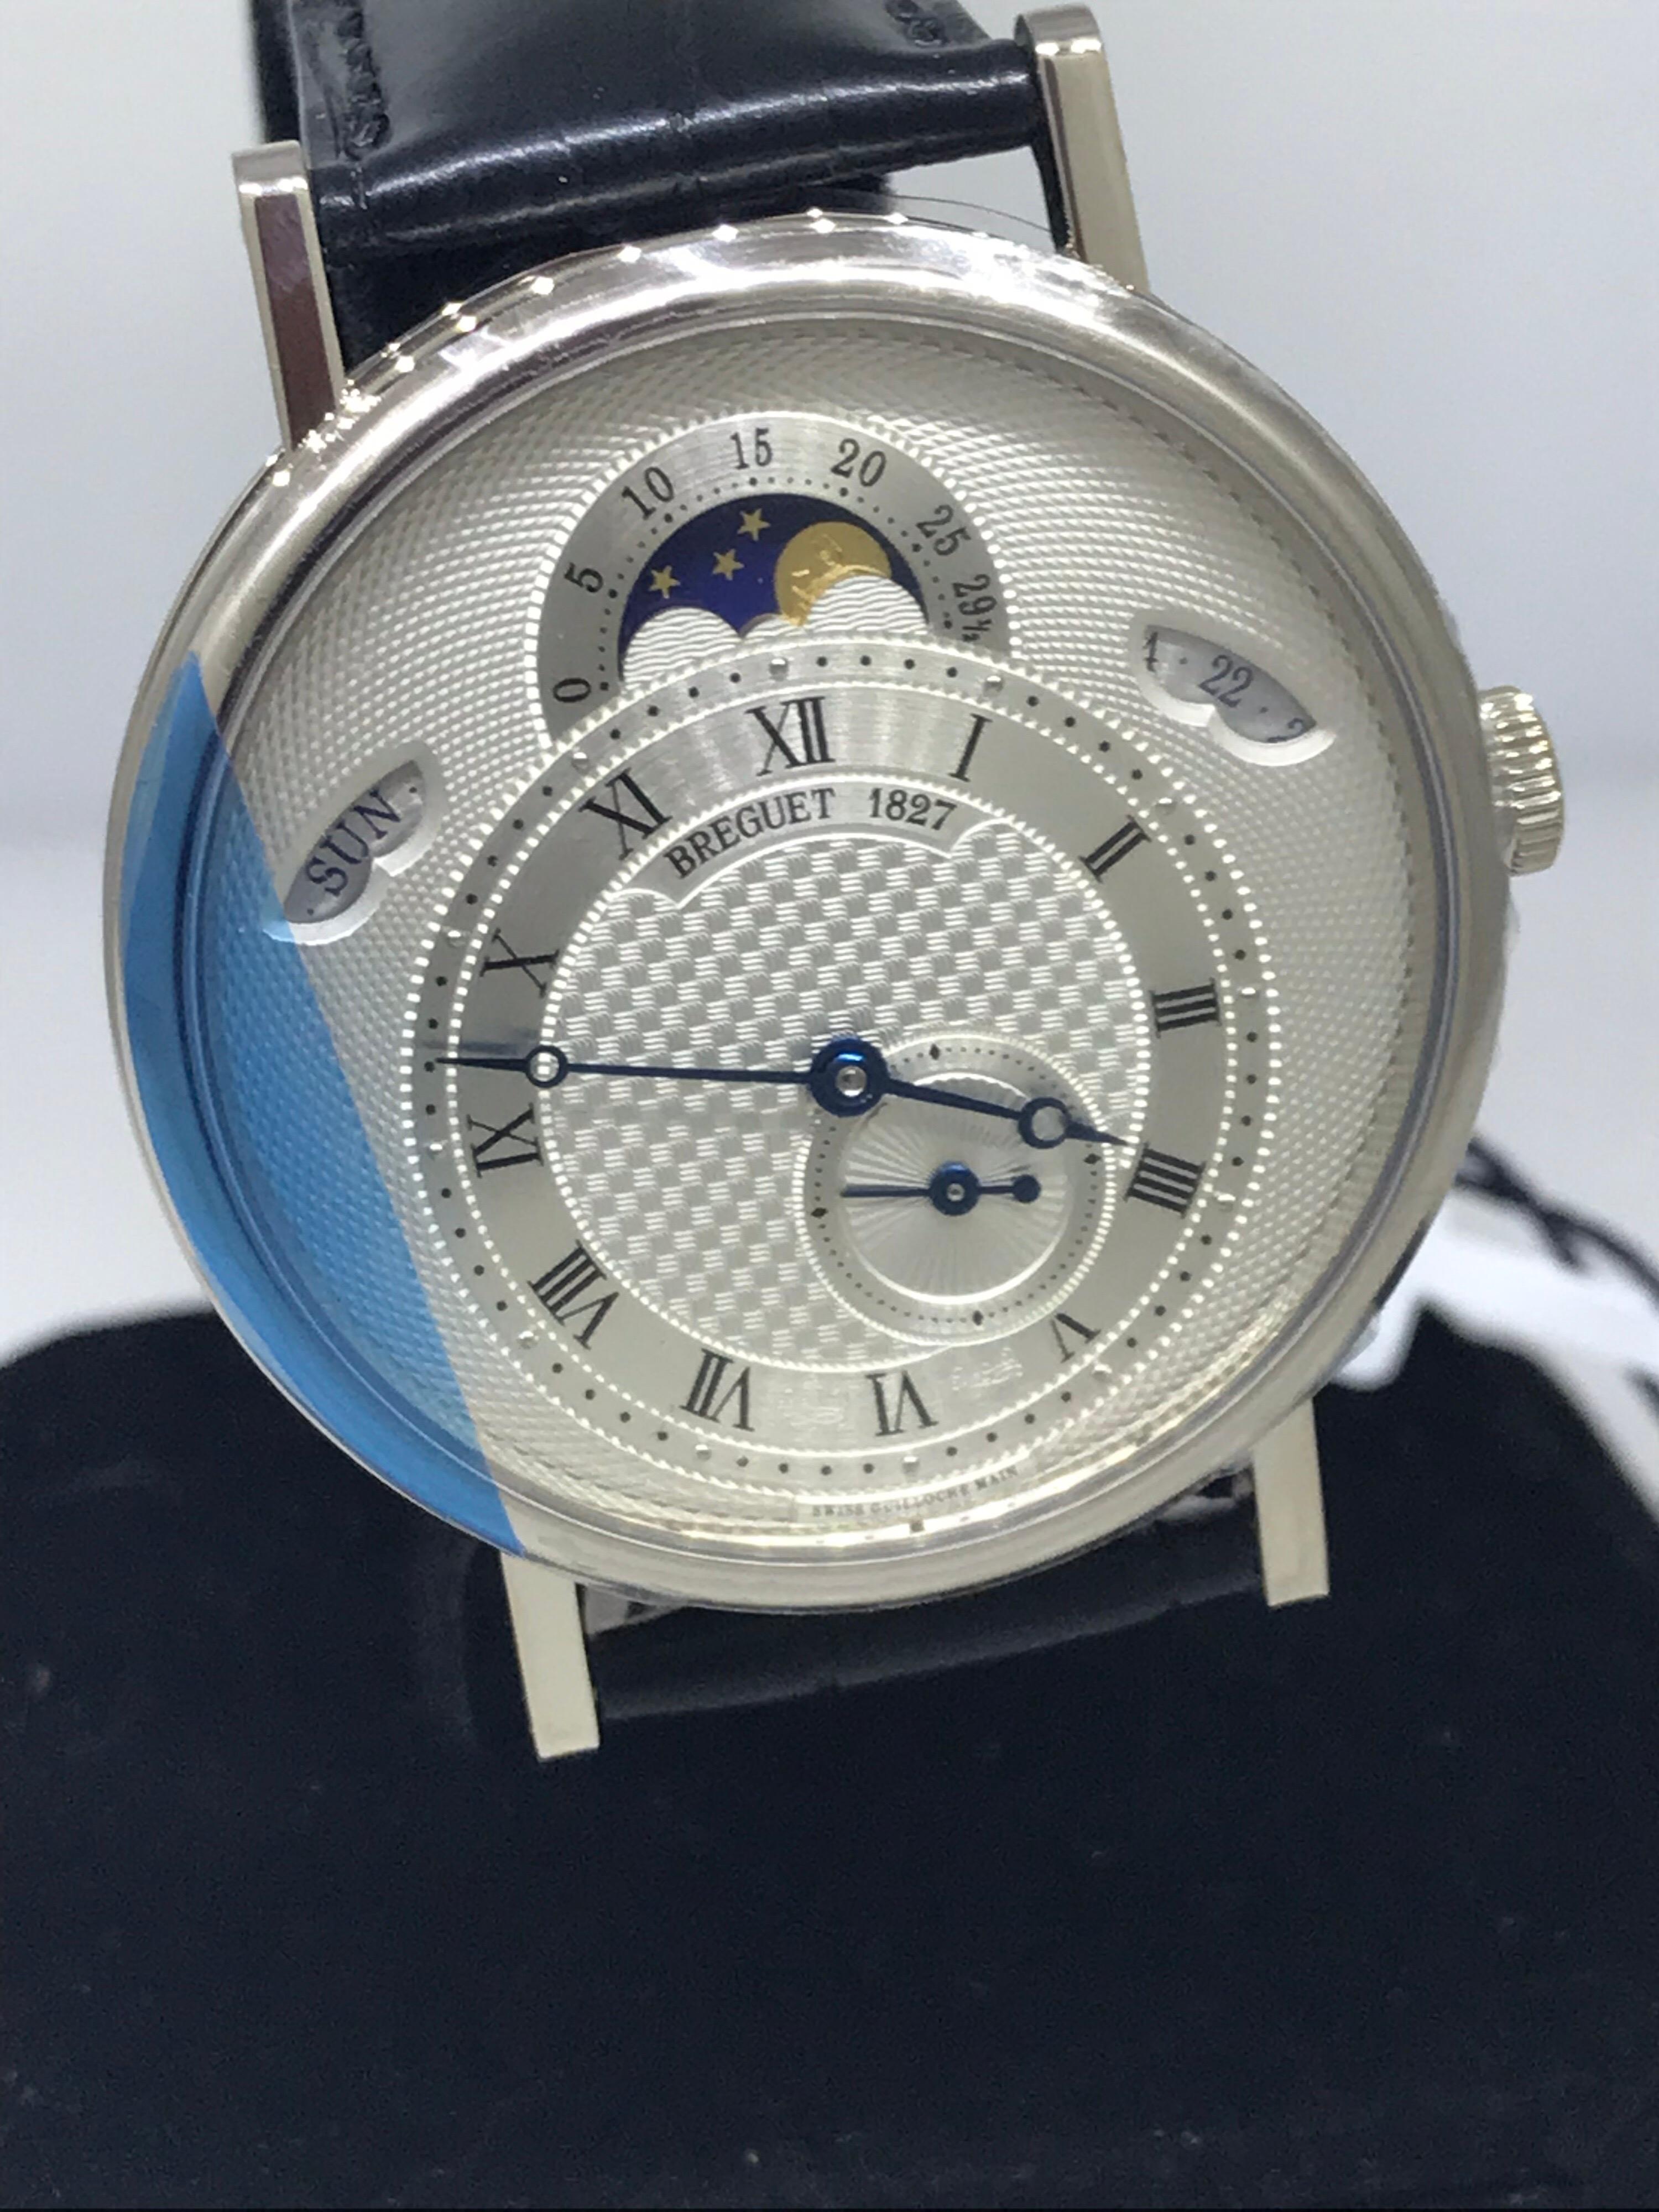 Breguet Classique White Gold Day Date Moonphase Men's Watch 7337bb/1e/9v6 In New Condition For Sale In New York, NY